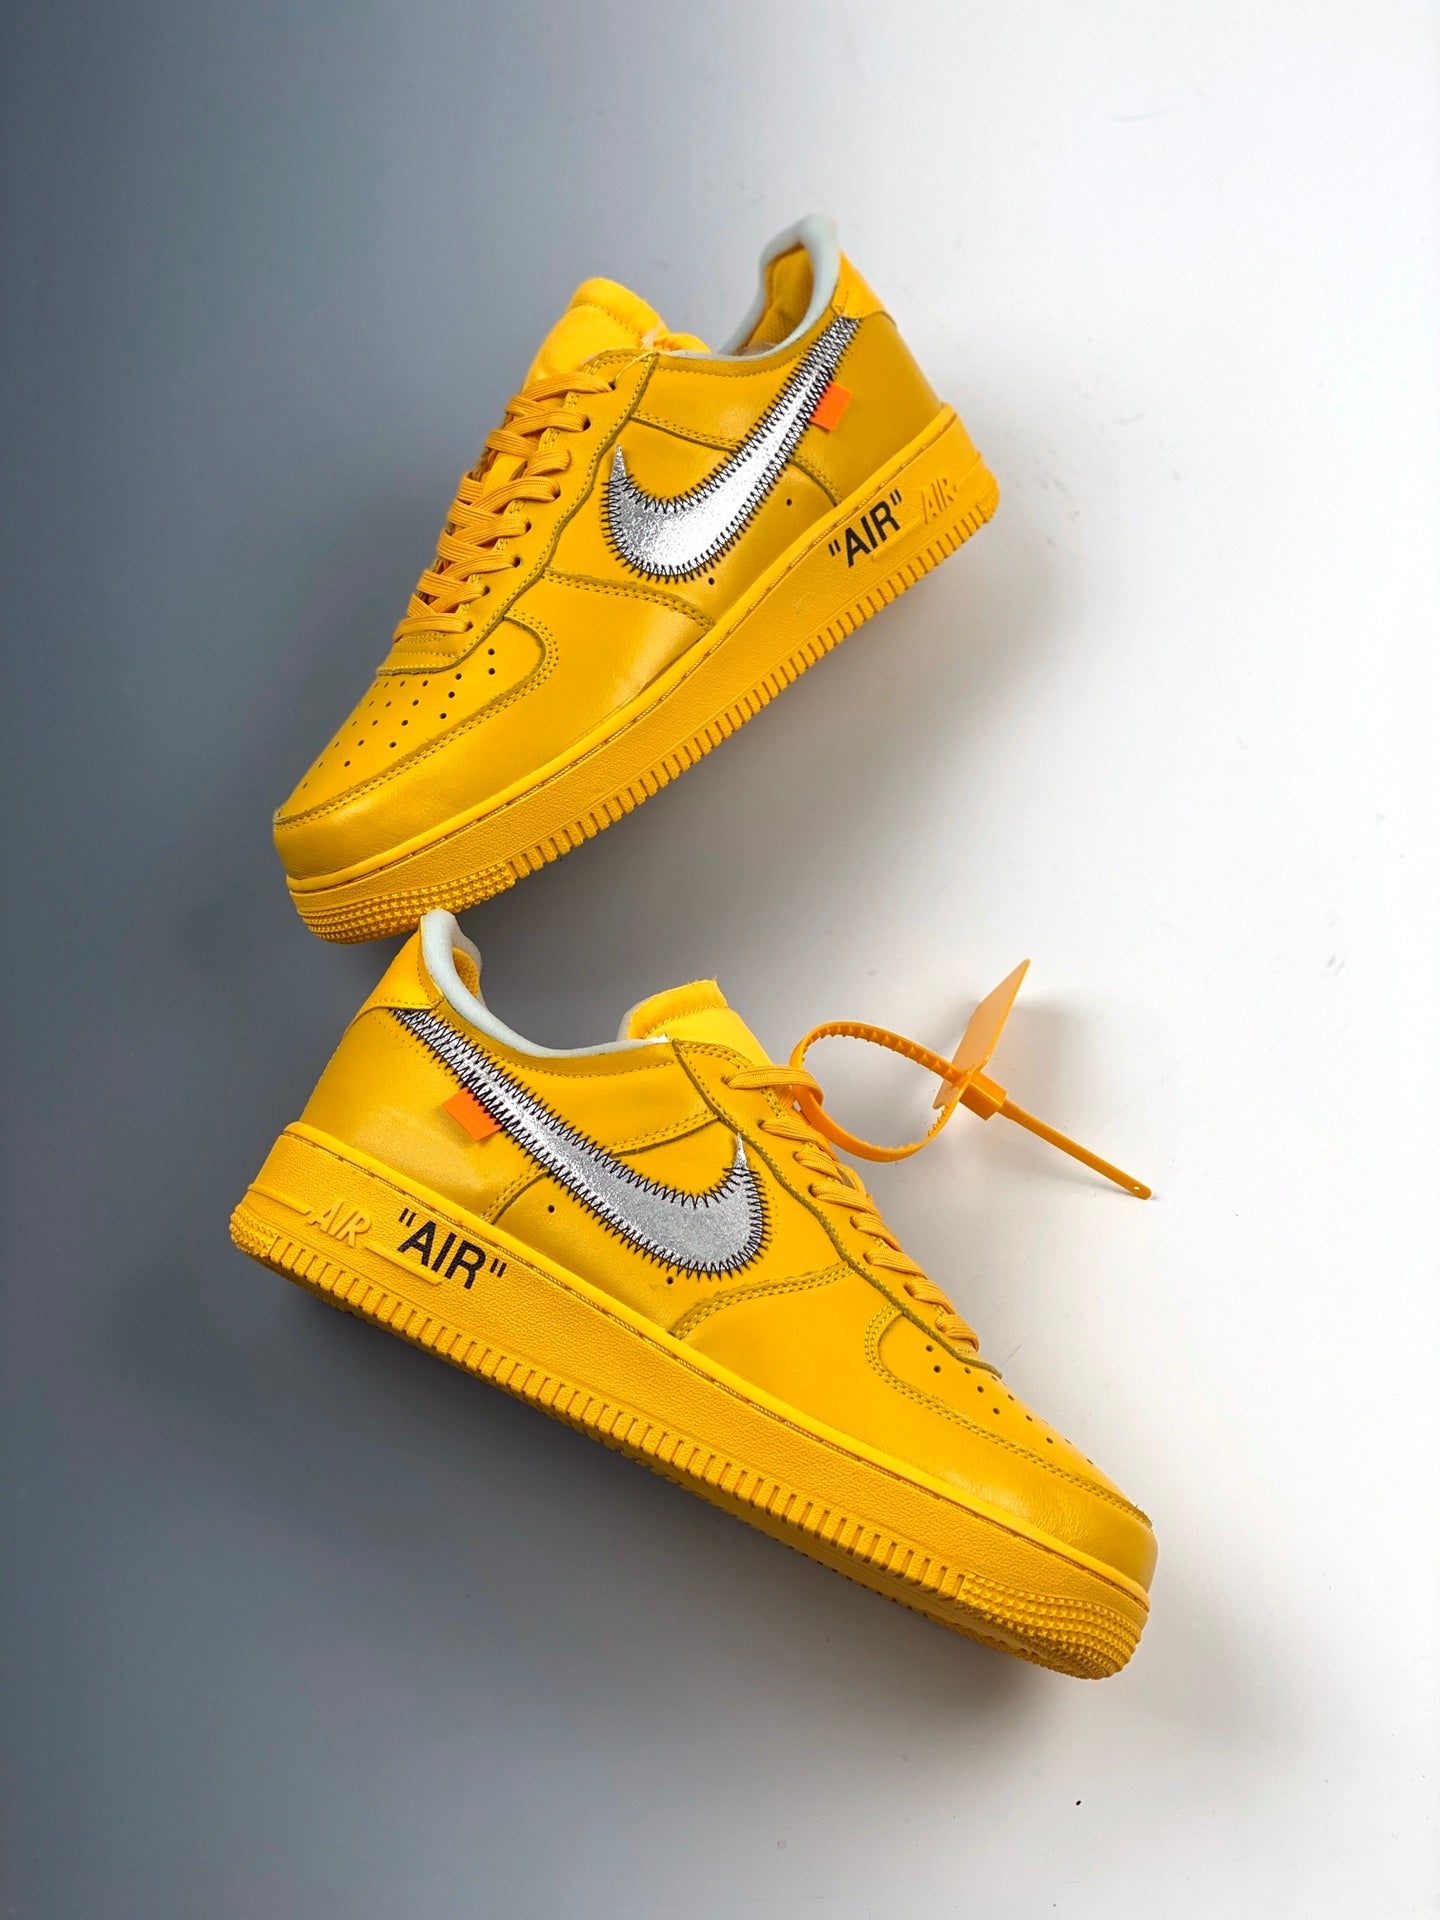 Air Force 1 Low '07 x Off-White “MoMA” $3700